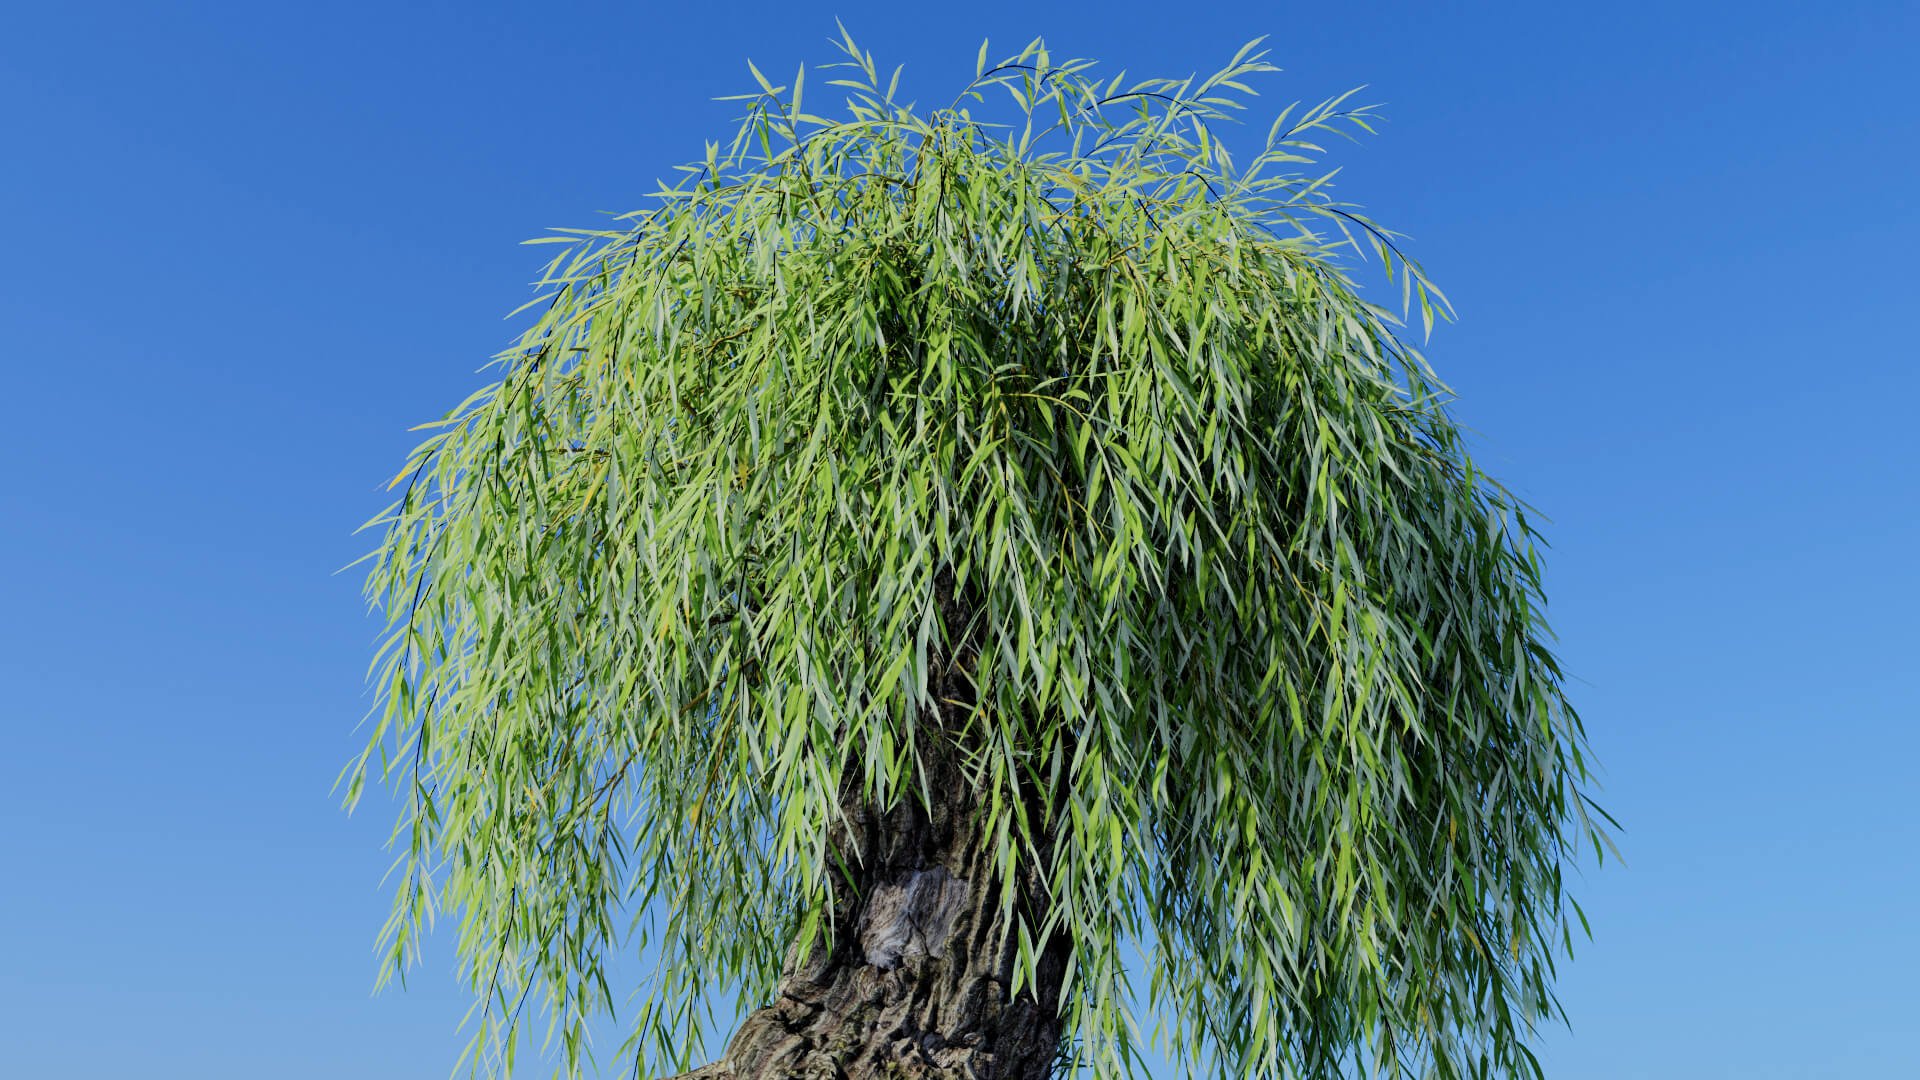 3D model of the Weeping willow pollarded Salix babylonica pollarded